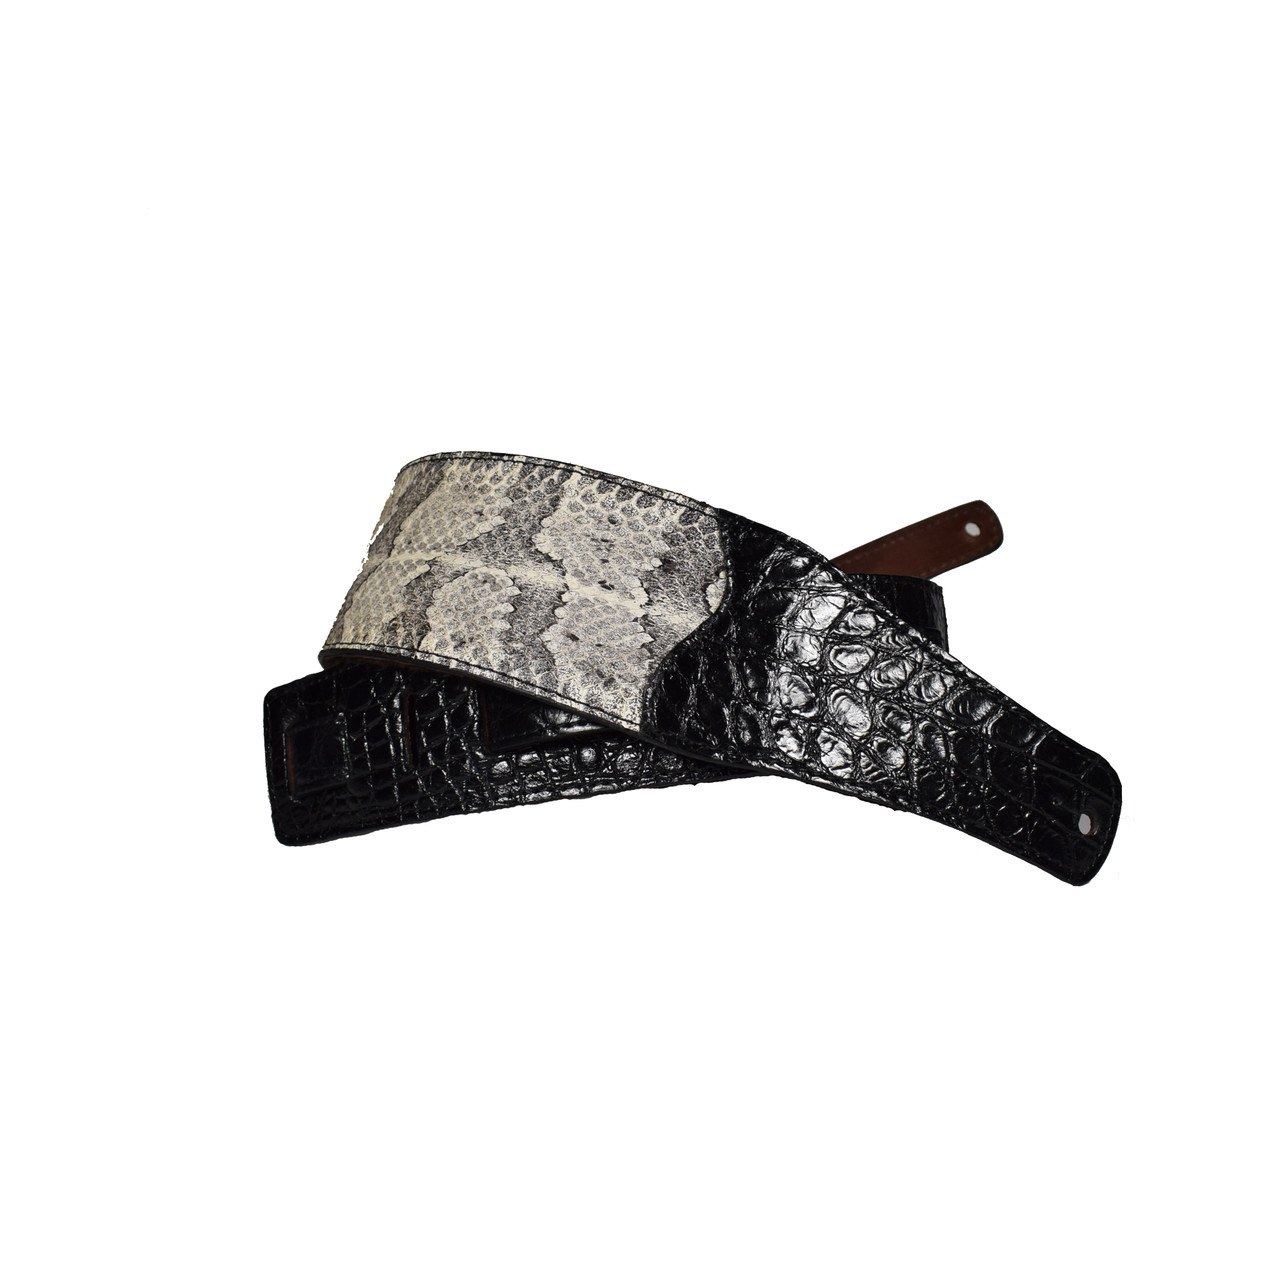 Genuine Python Leather, Exotic Snake Skin, Black Leather,Black and White  Leather